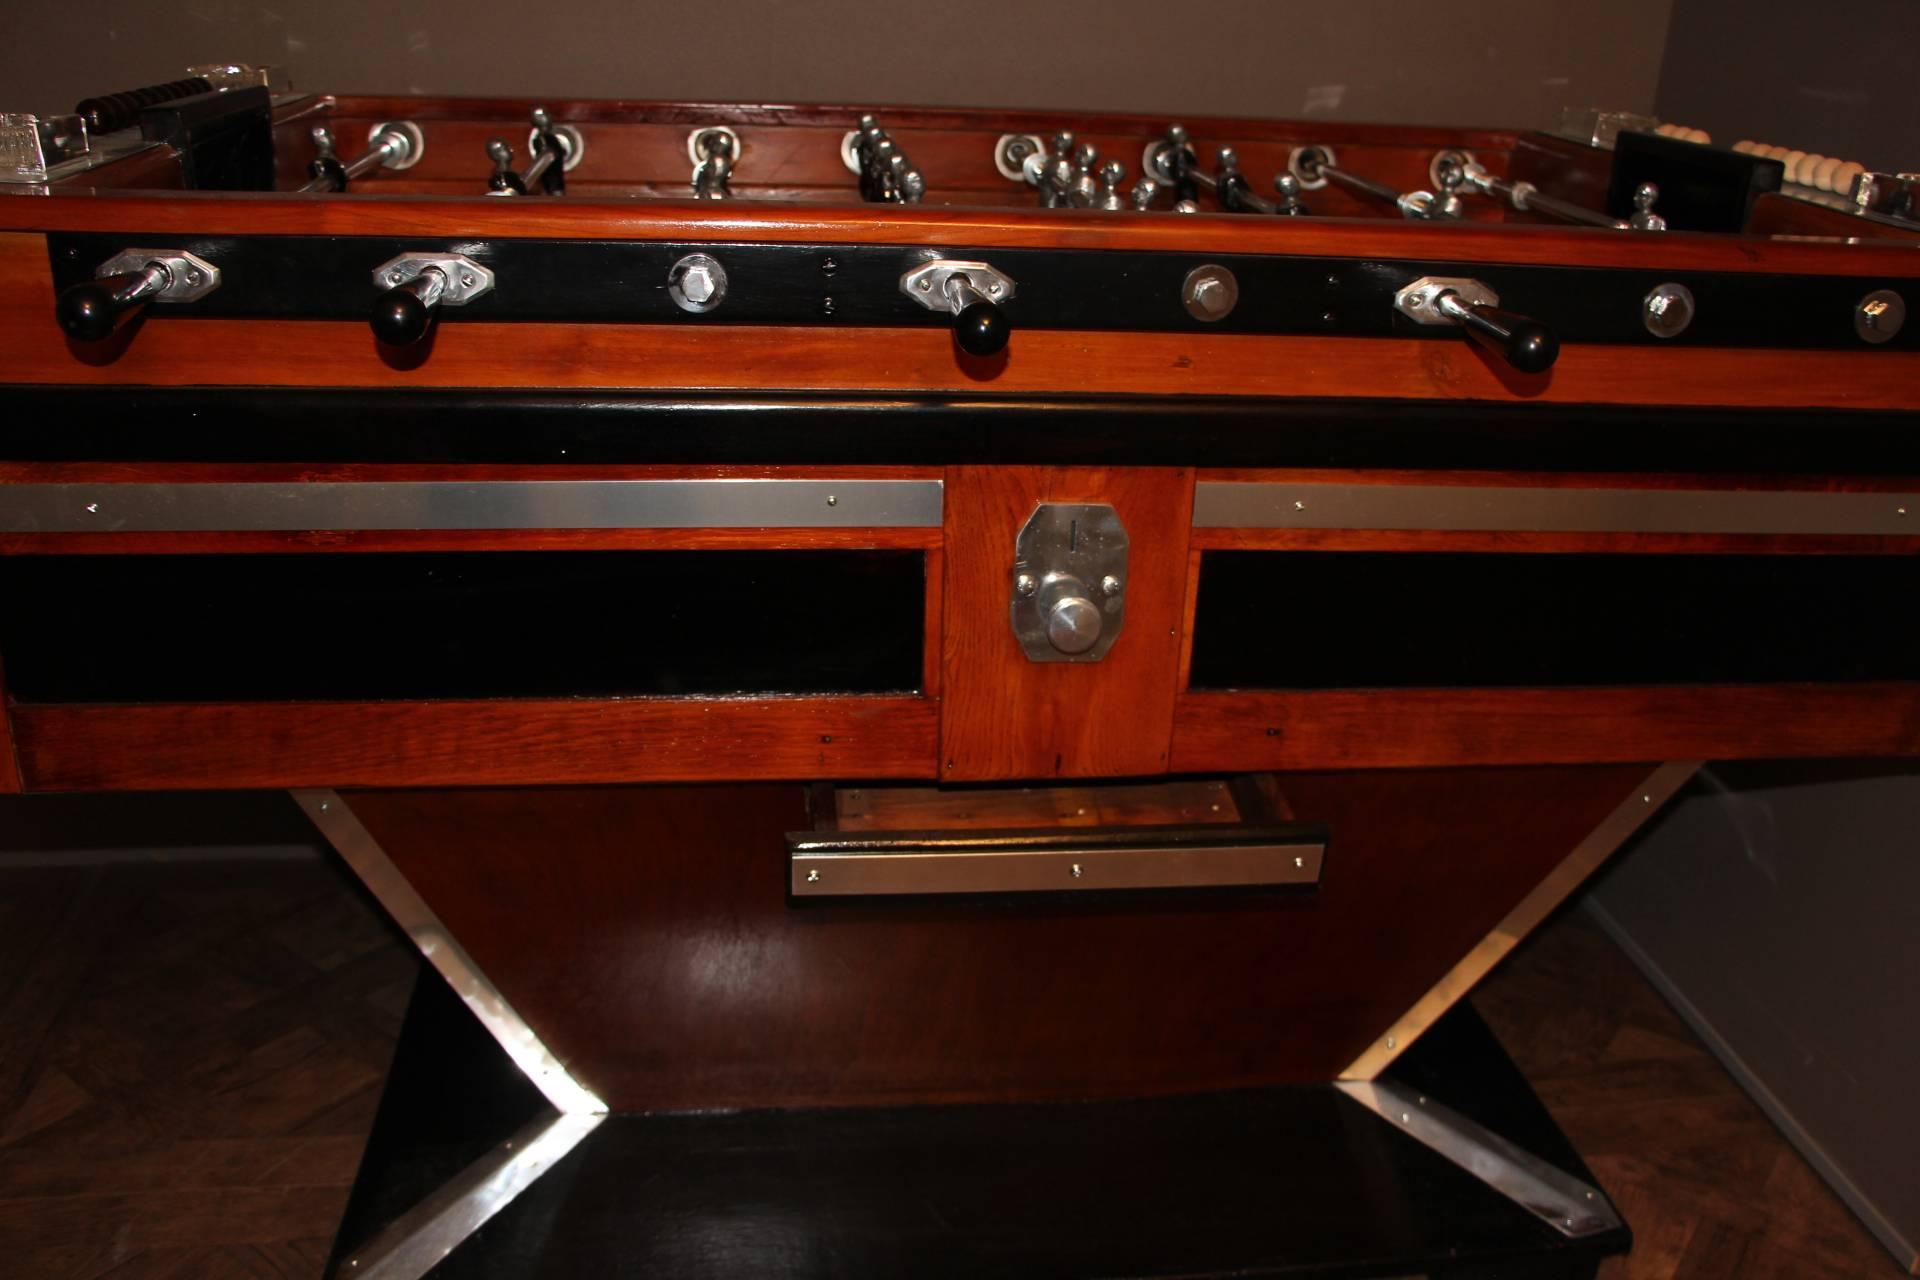 This magnificent French beechwood and ebonized table on shaped supports has got black and silver steel players and polished aluminium fittings. It is a beautiful decorative piece as well as a fabulous game table in working order. It still has got